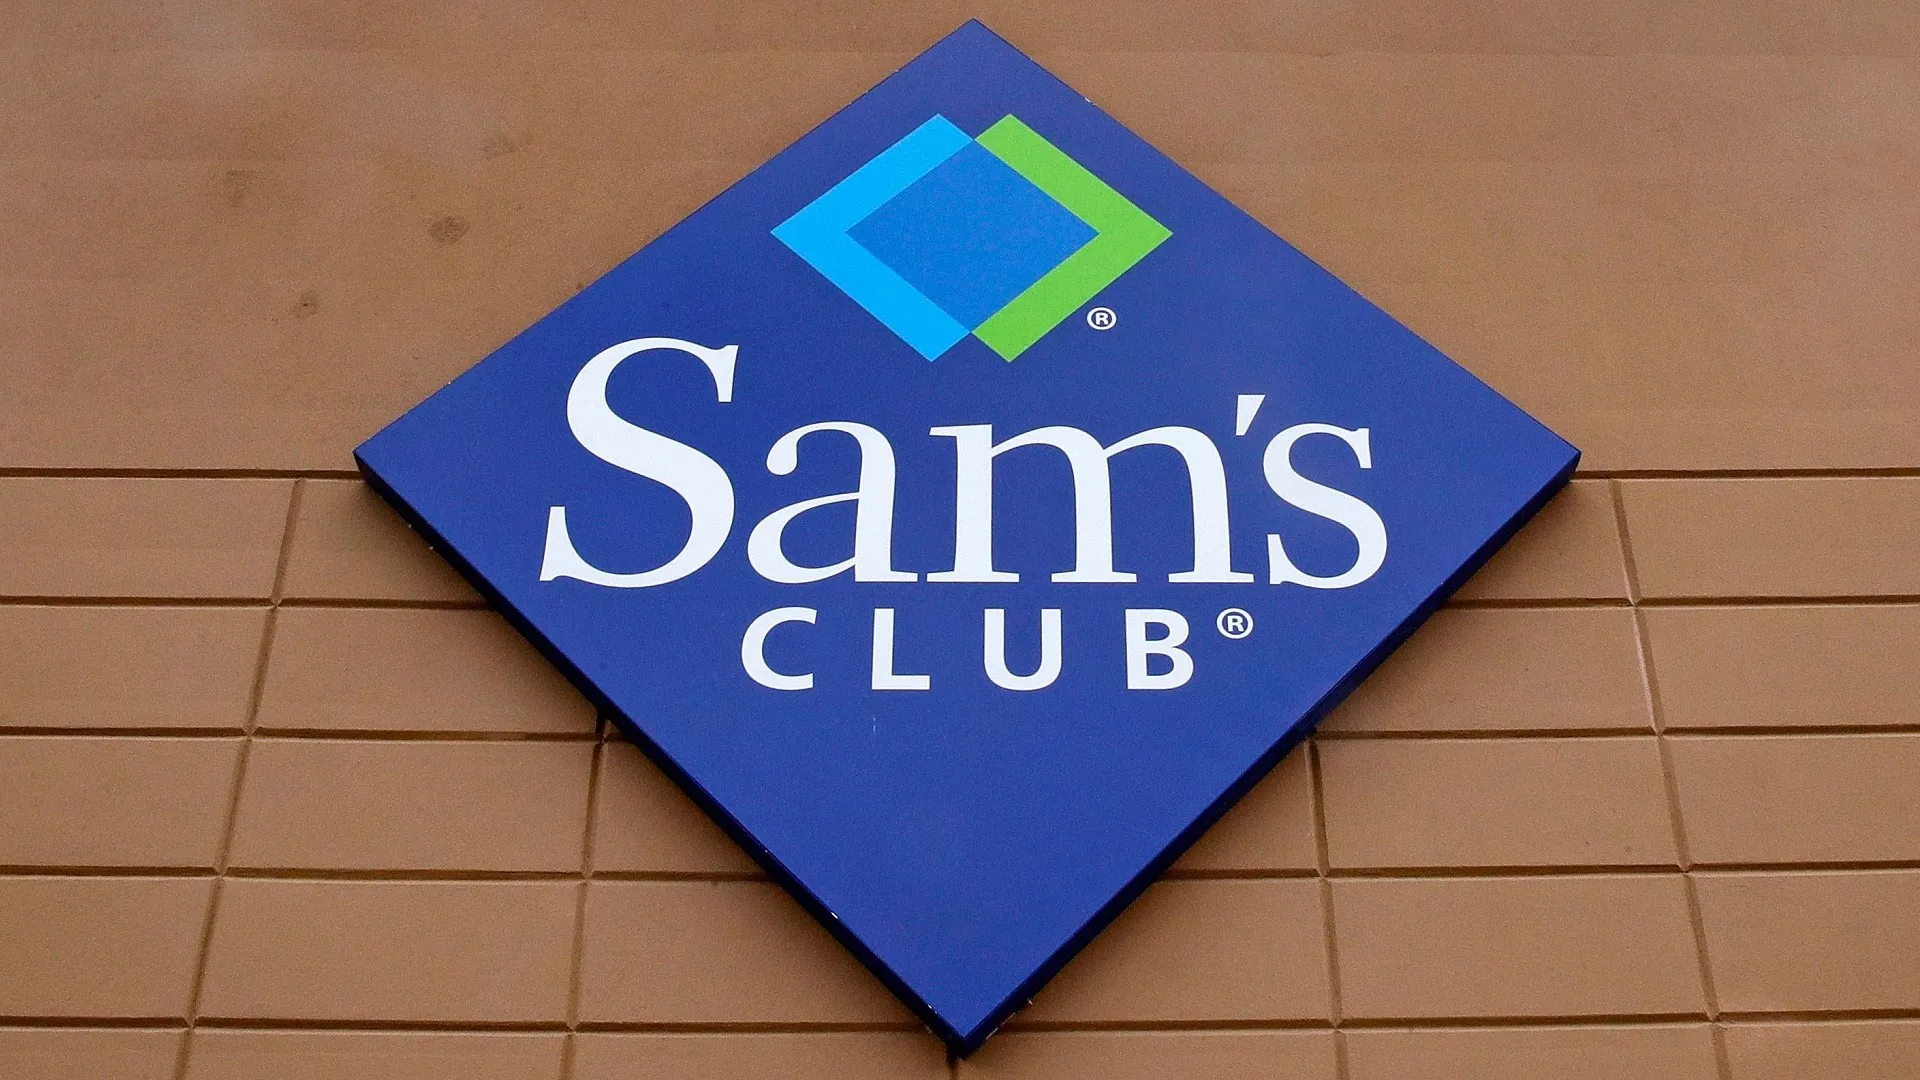 10 Things You Should Know Before Shopping at Sam's Club for the First Time